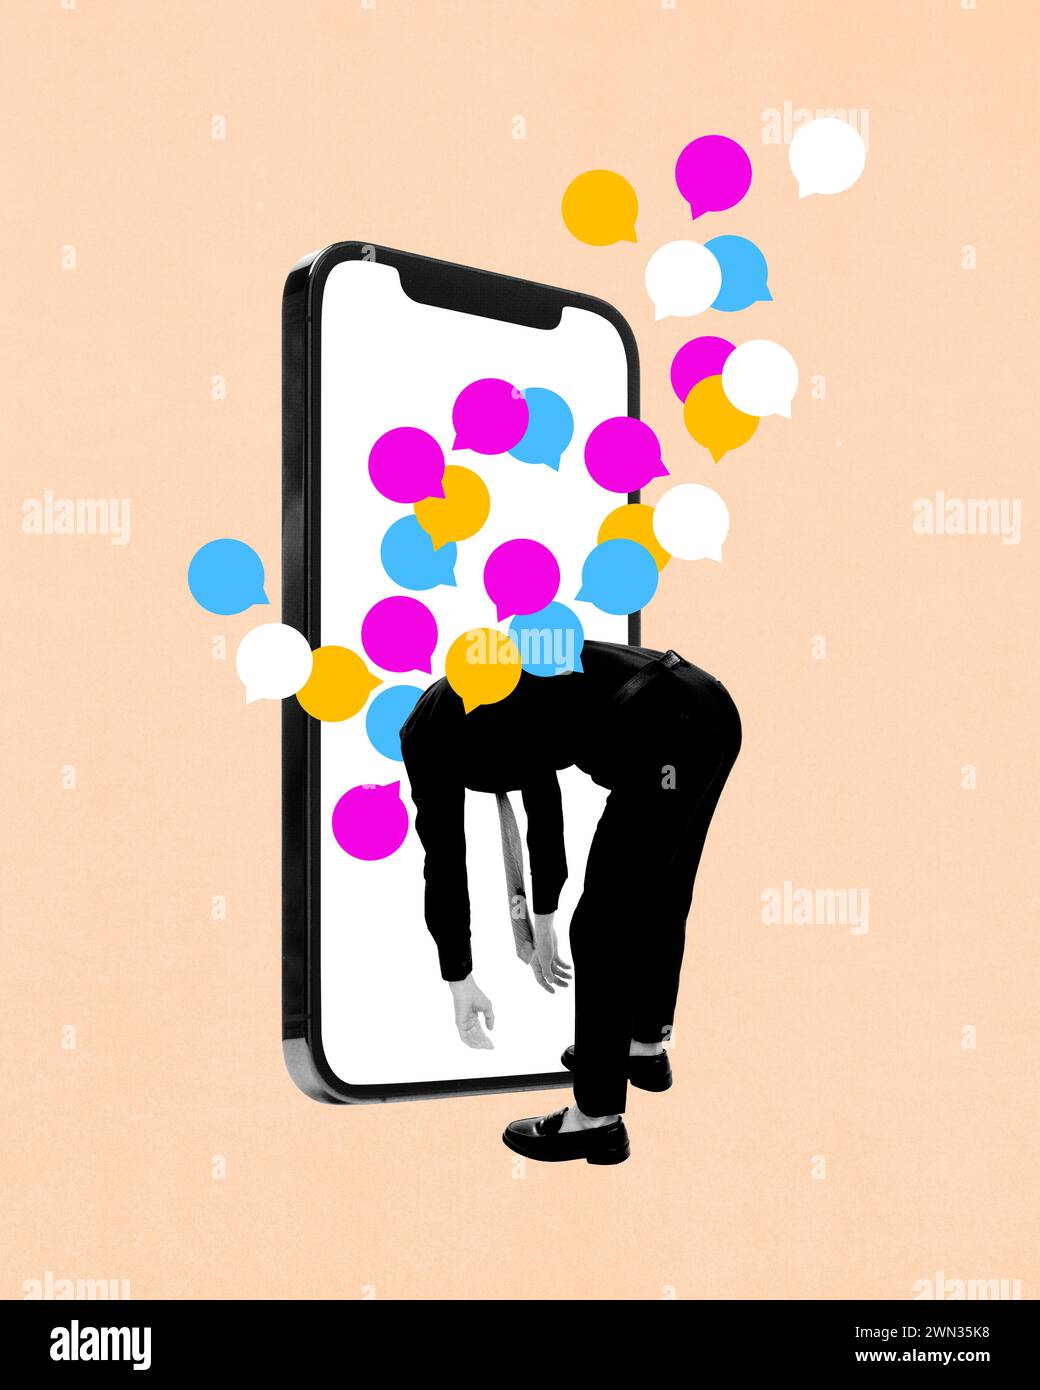 Male head stuck into giant mobile phone screen with many multicolored speech bubbles. Online communication. Contemporary art collage. Stock Photo